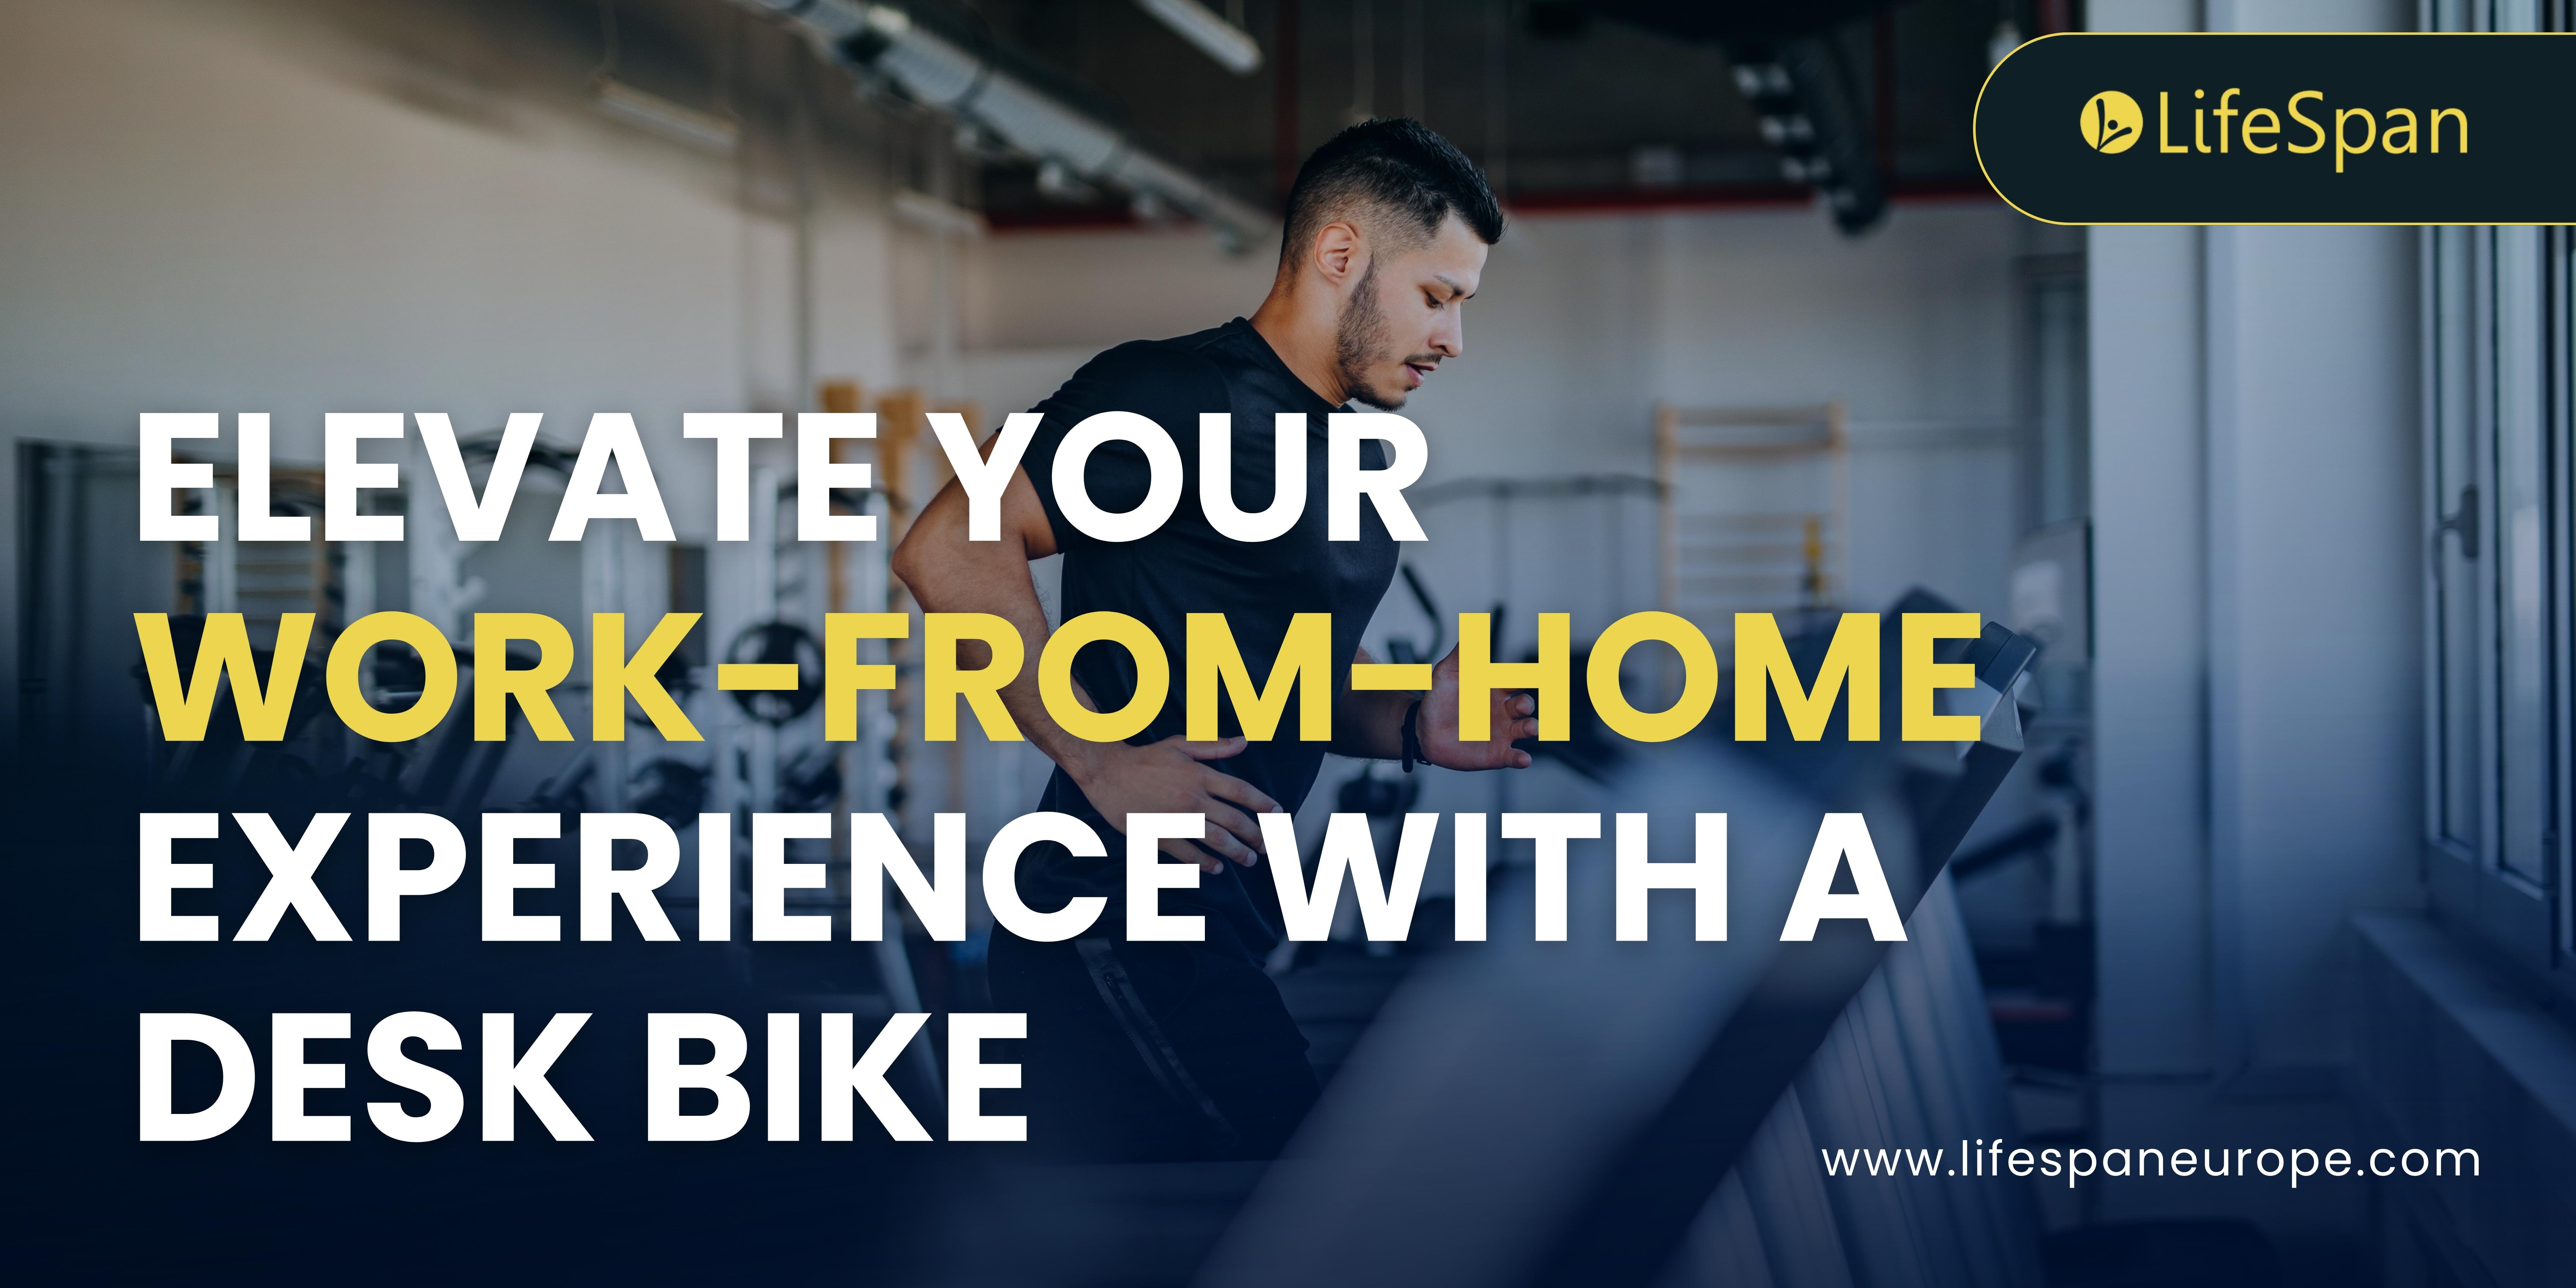 Elevate Your Work-from-Home Experience with a Desk Bike – lifespaneurope